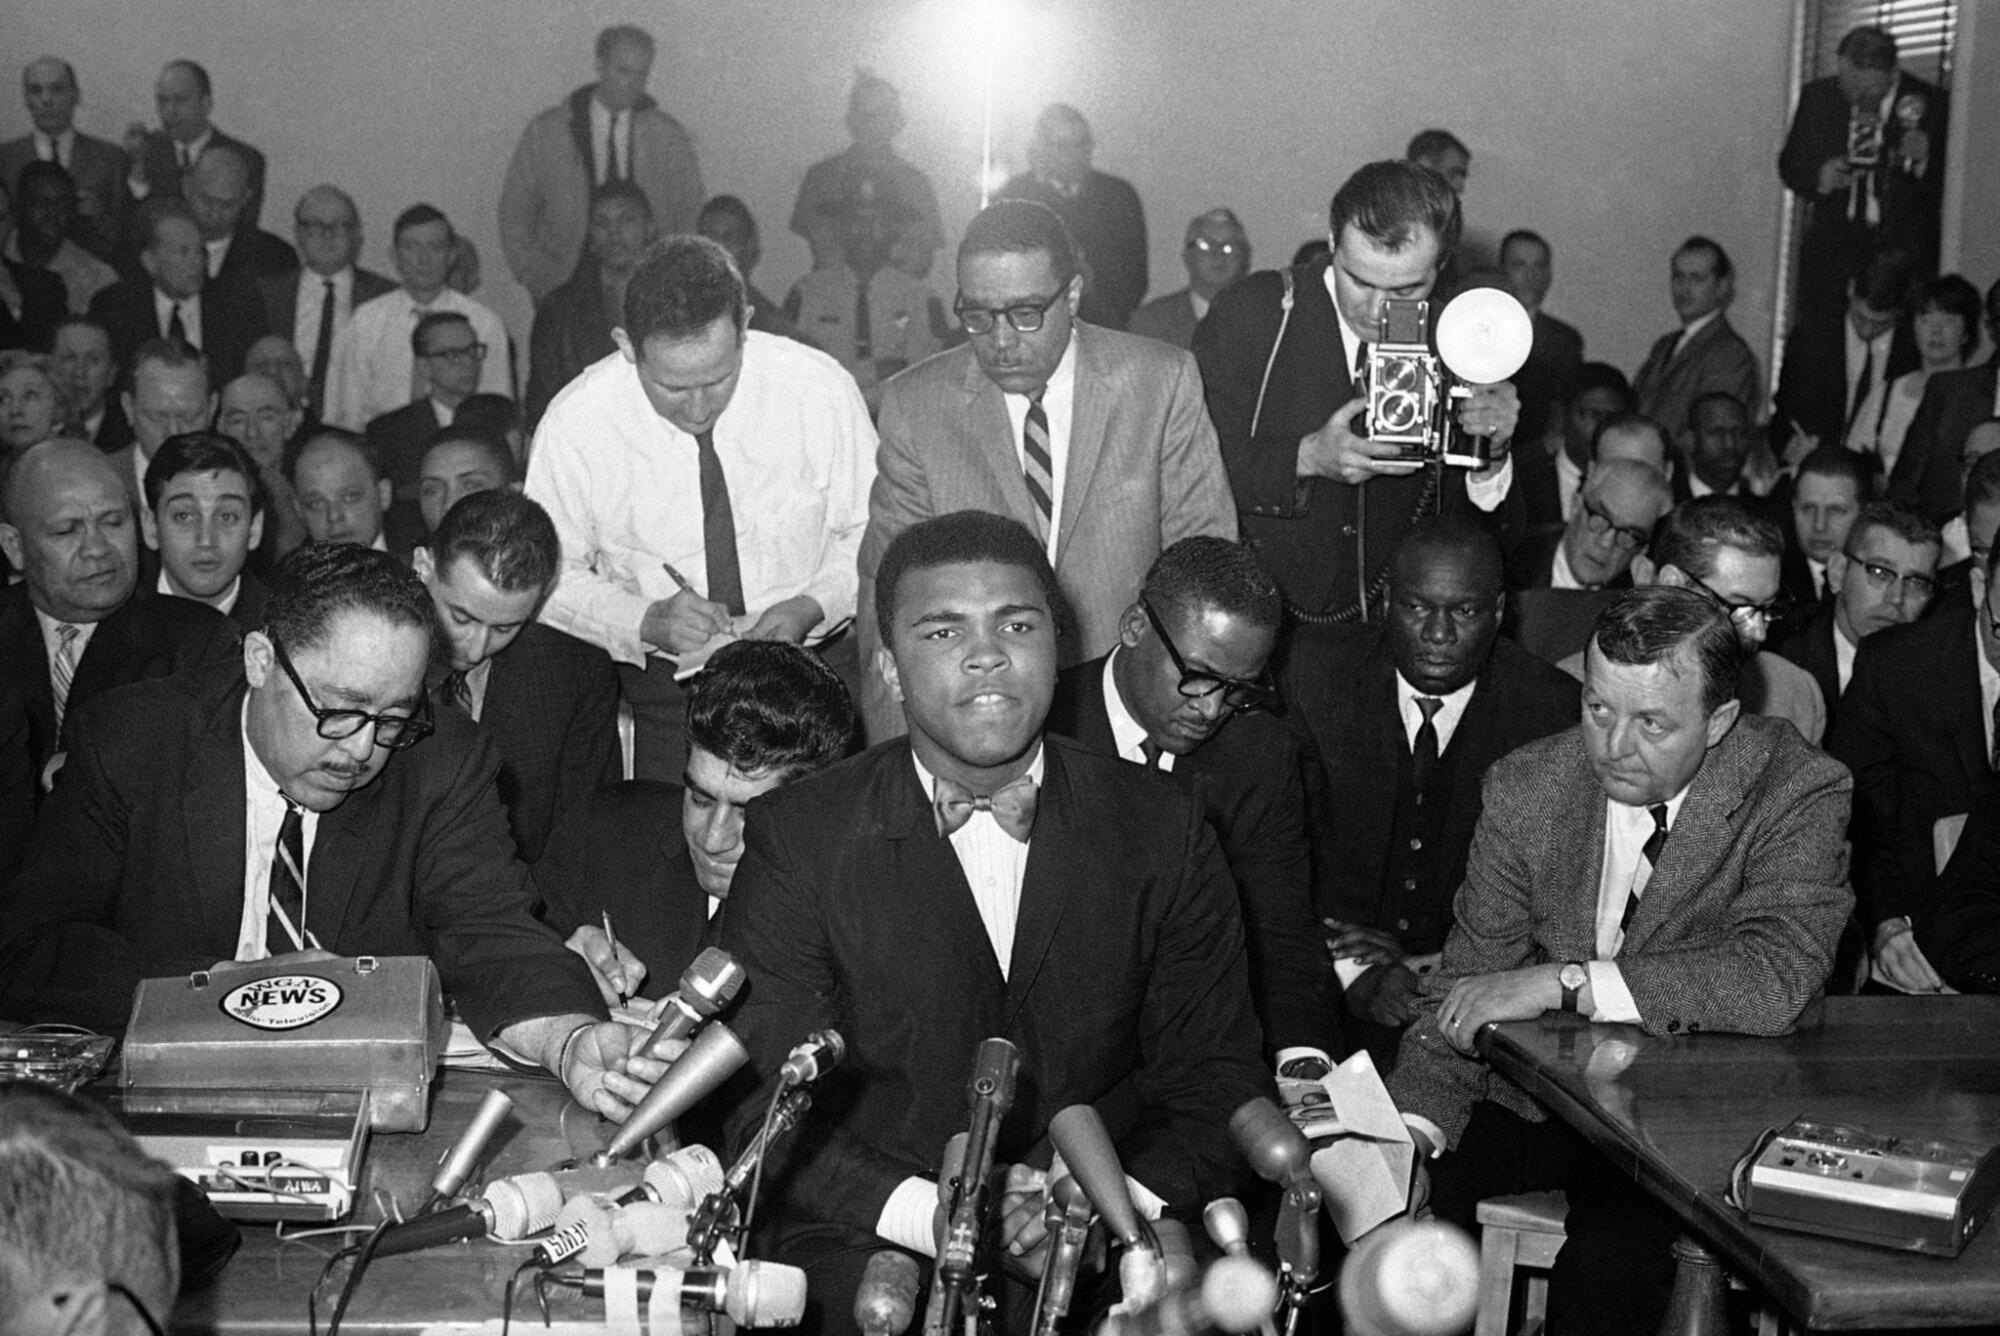 A black-and-white photo of Muhammad Ali in a dark suit sitting at several microphones, surrounded by members of the media